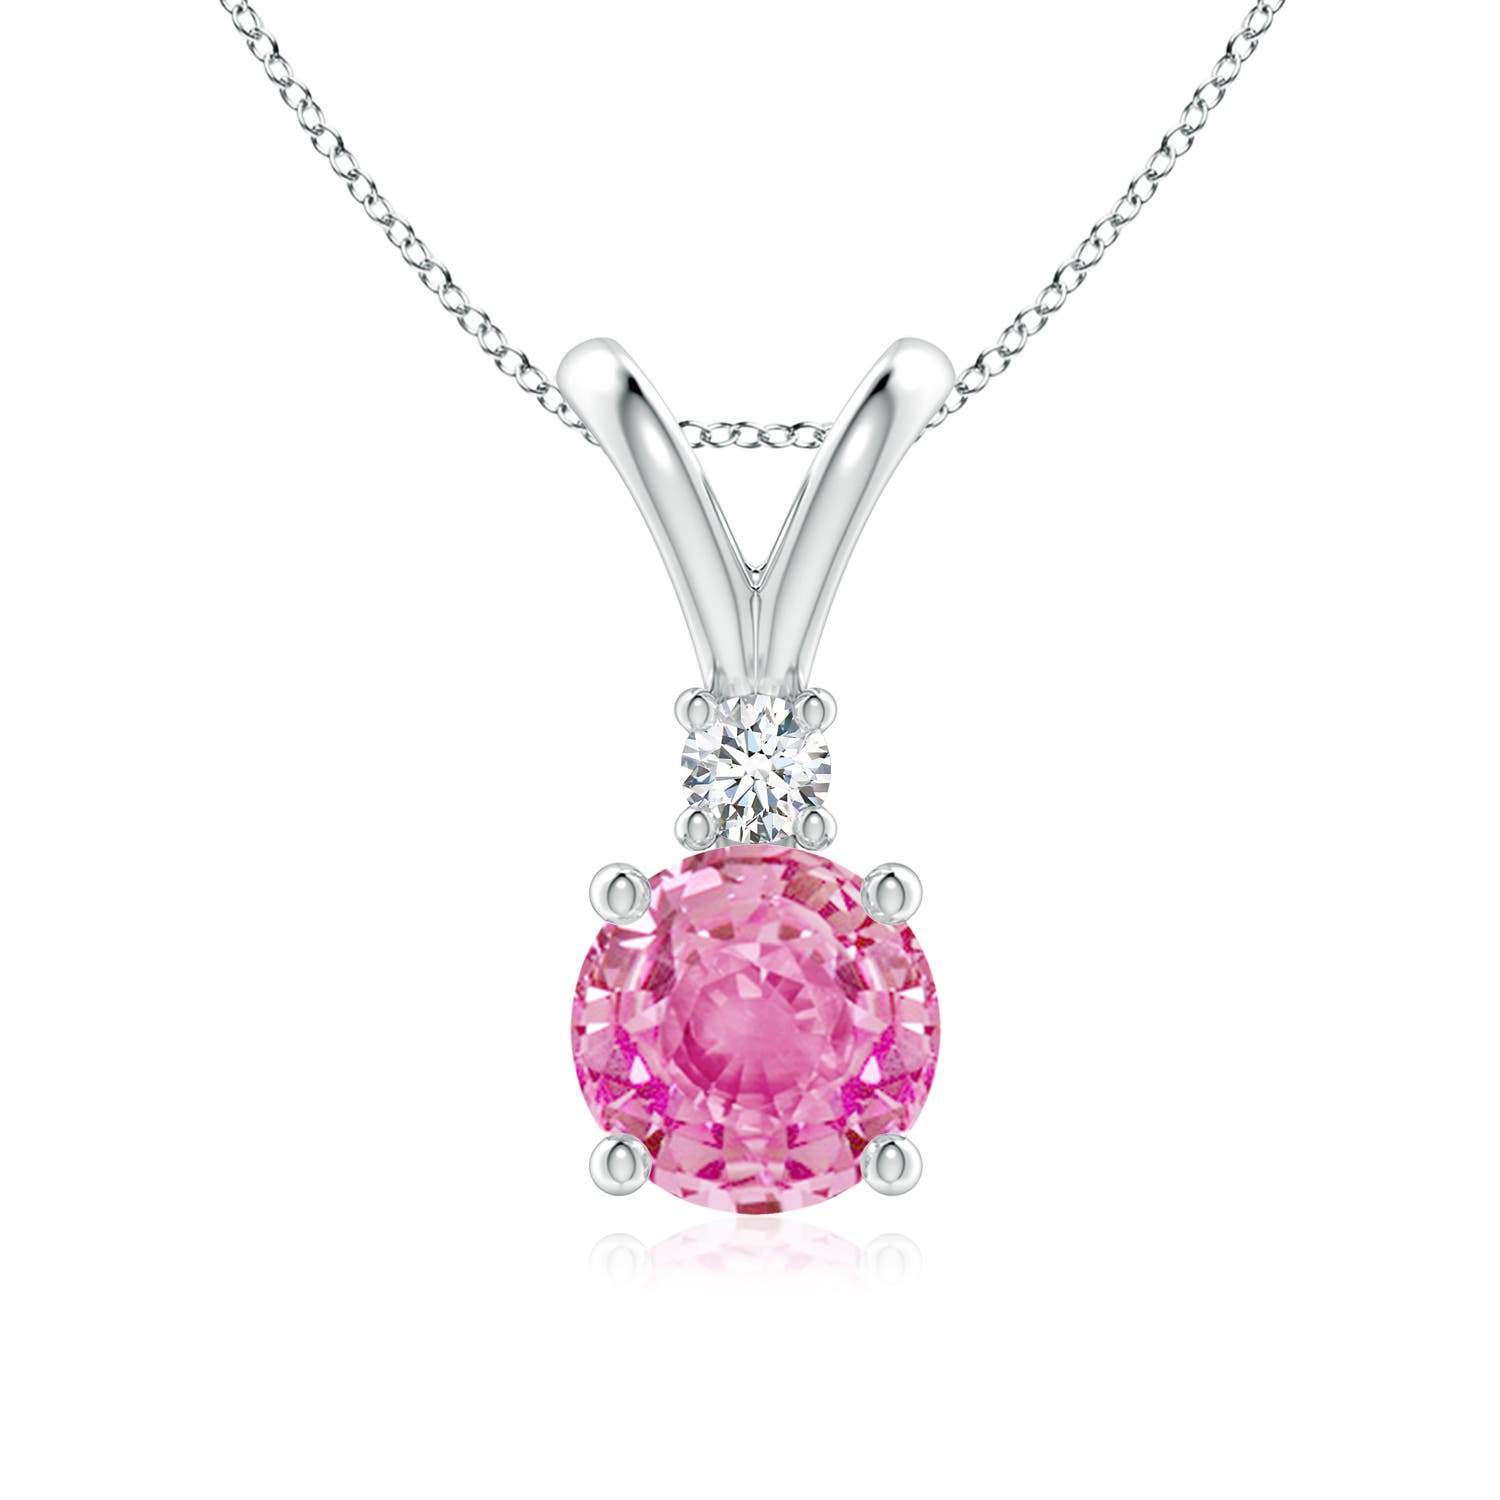 AA - Pink Sapphire / 1.67 CT / 14 KT White Gold